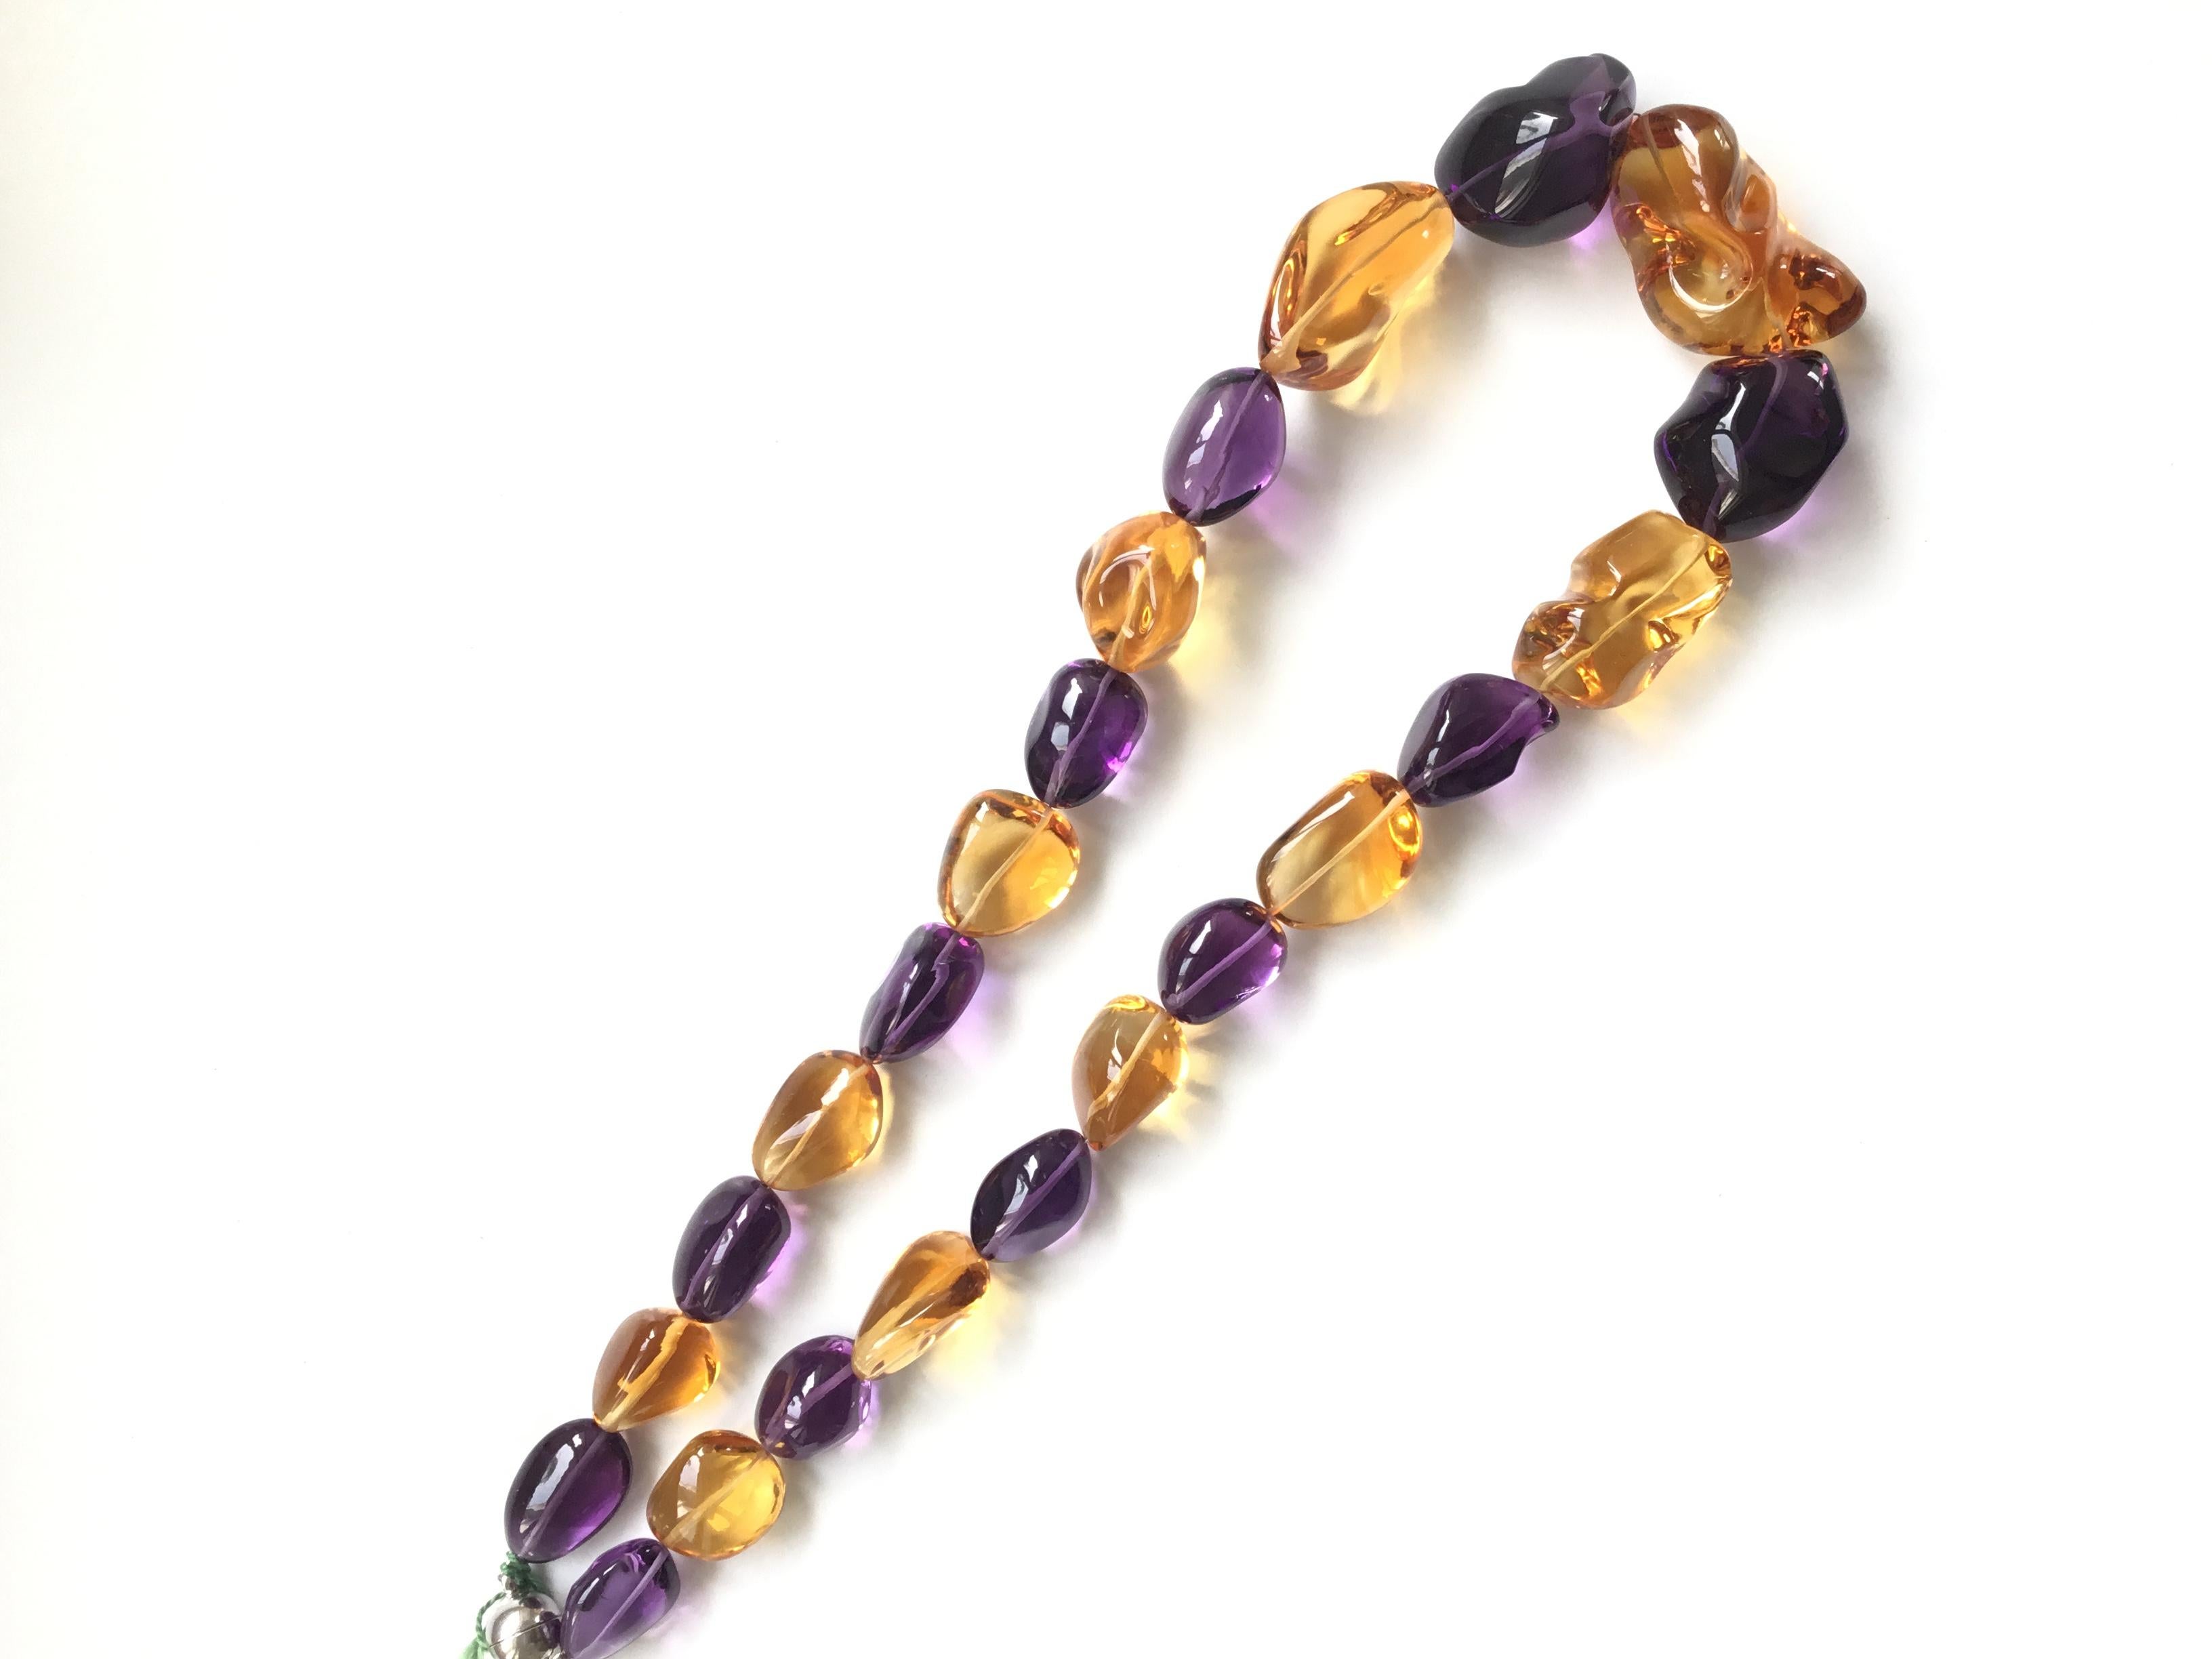 Top Quality Citrine & Amethyst Plain Tumbled Natural Gemstone Necklace
Size : 19x14 37x19 MM Beads
Weight : 764.35 Carats
Length Of Necklace : 18 Inches